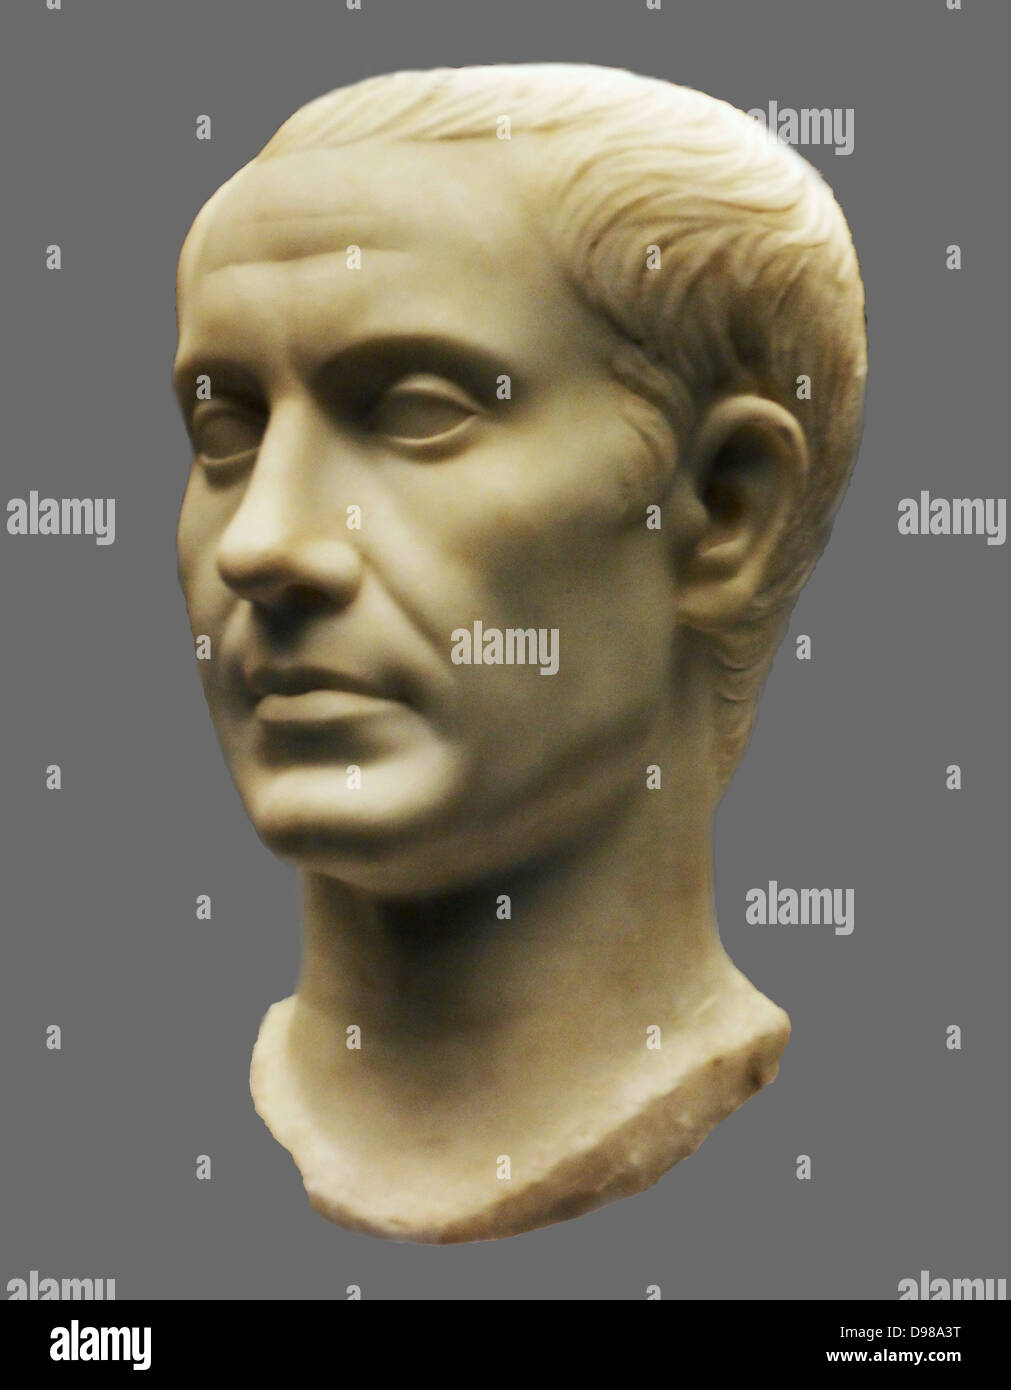 Portrait of Julius Caesar (100-44BC).  Roman, made in Italy AD40-50).  This head is made of fine Greek marble and was once part of a statue, perhaps showing Caesar in a toga. Stock Photo